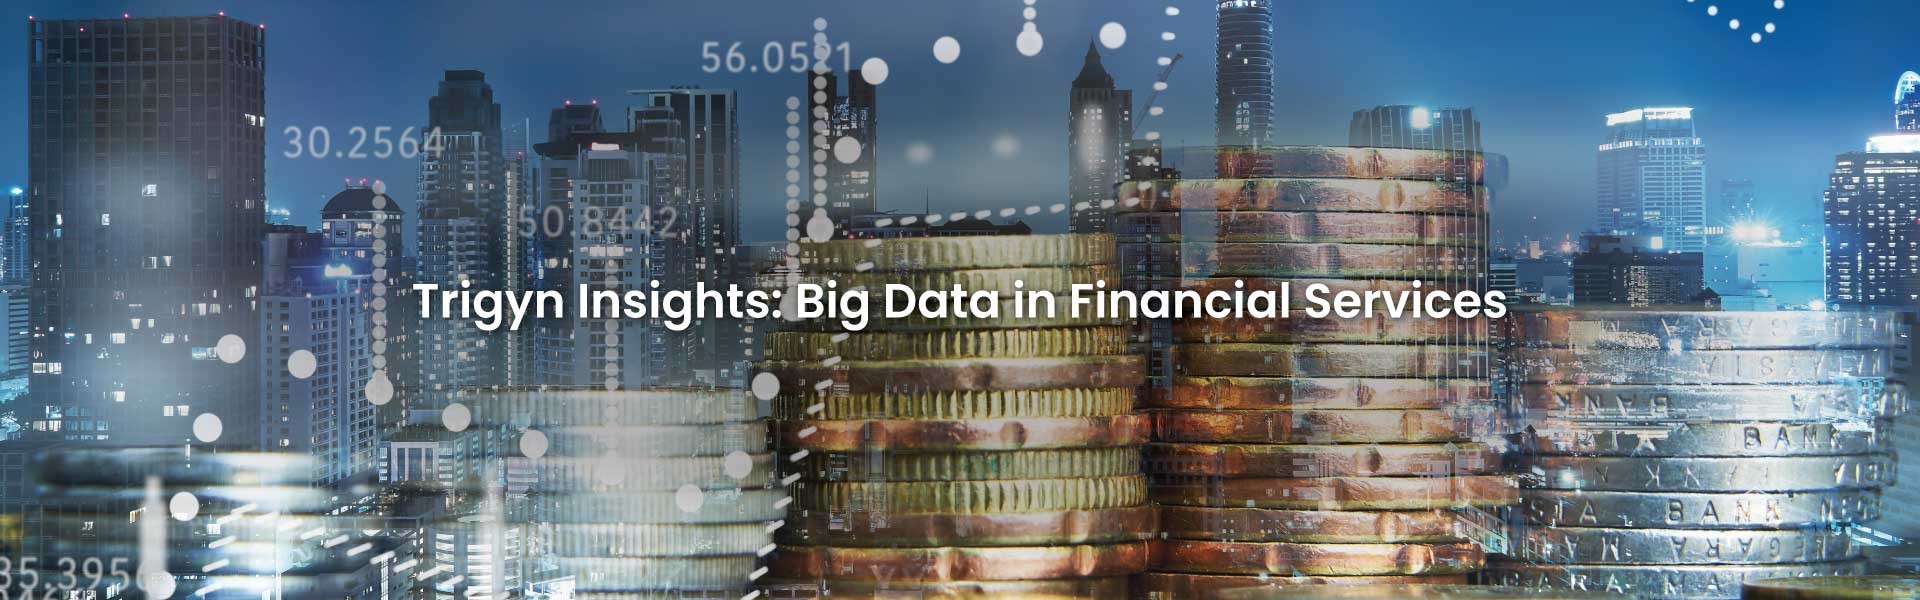 Big Data in Financial Services